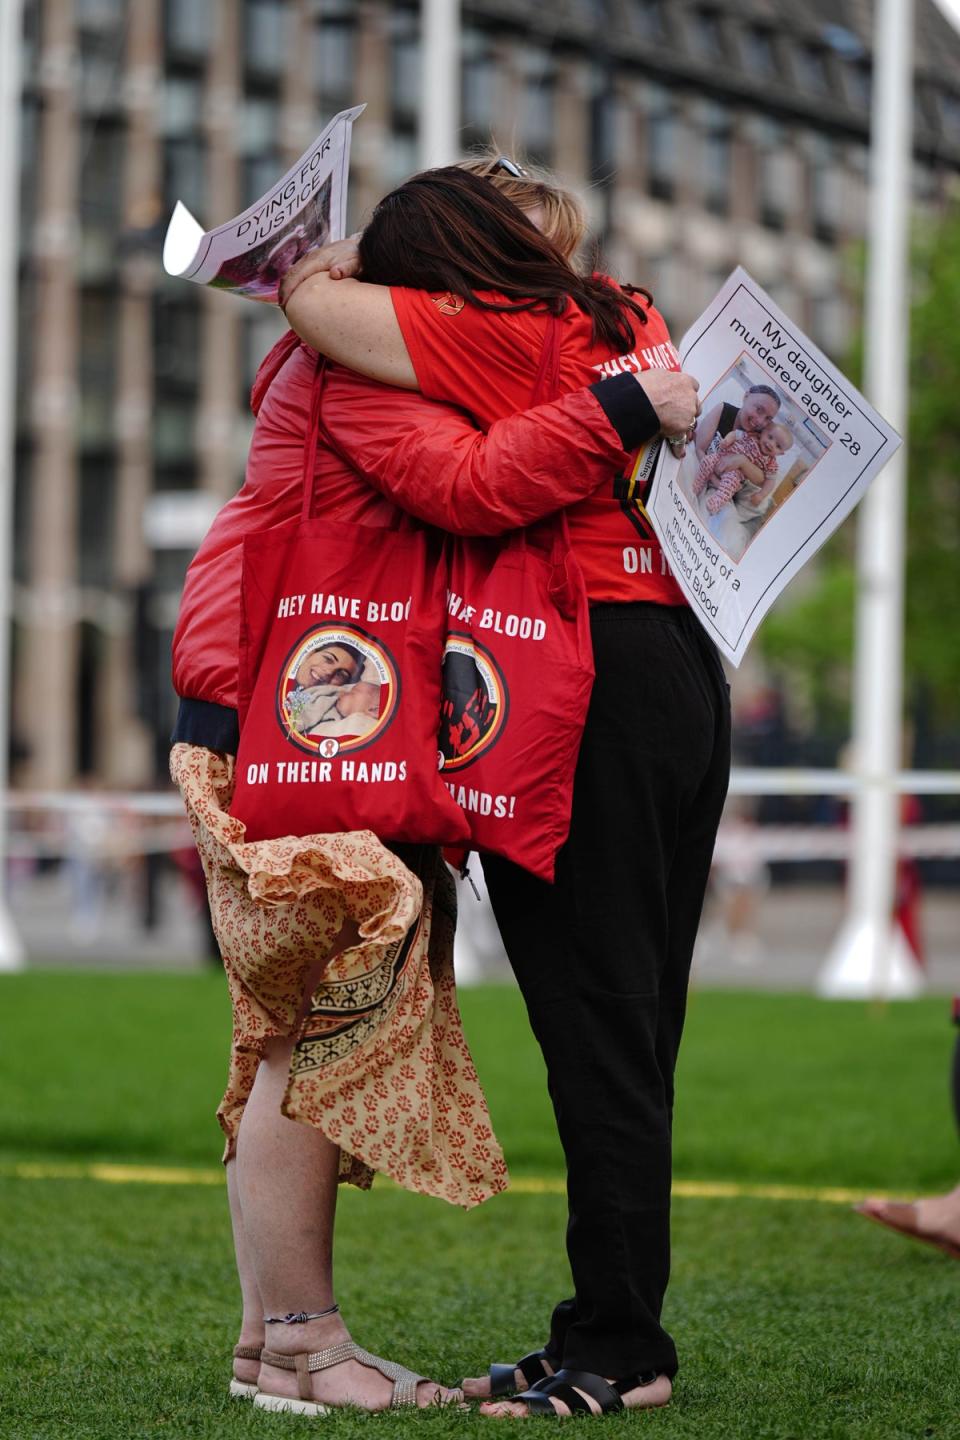 Infected blood campaigners hug in London (Aaron Chown/PA Wire)